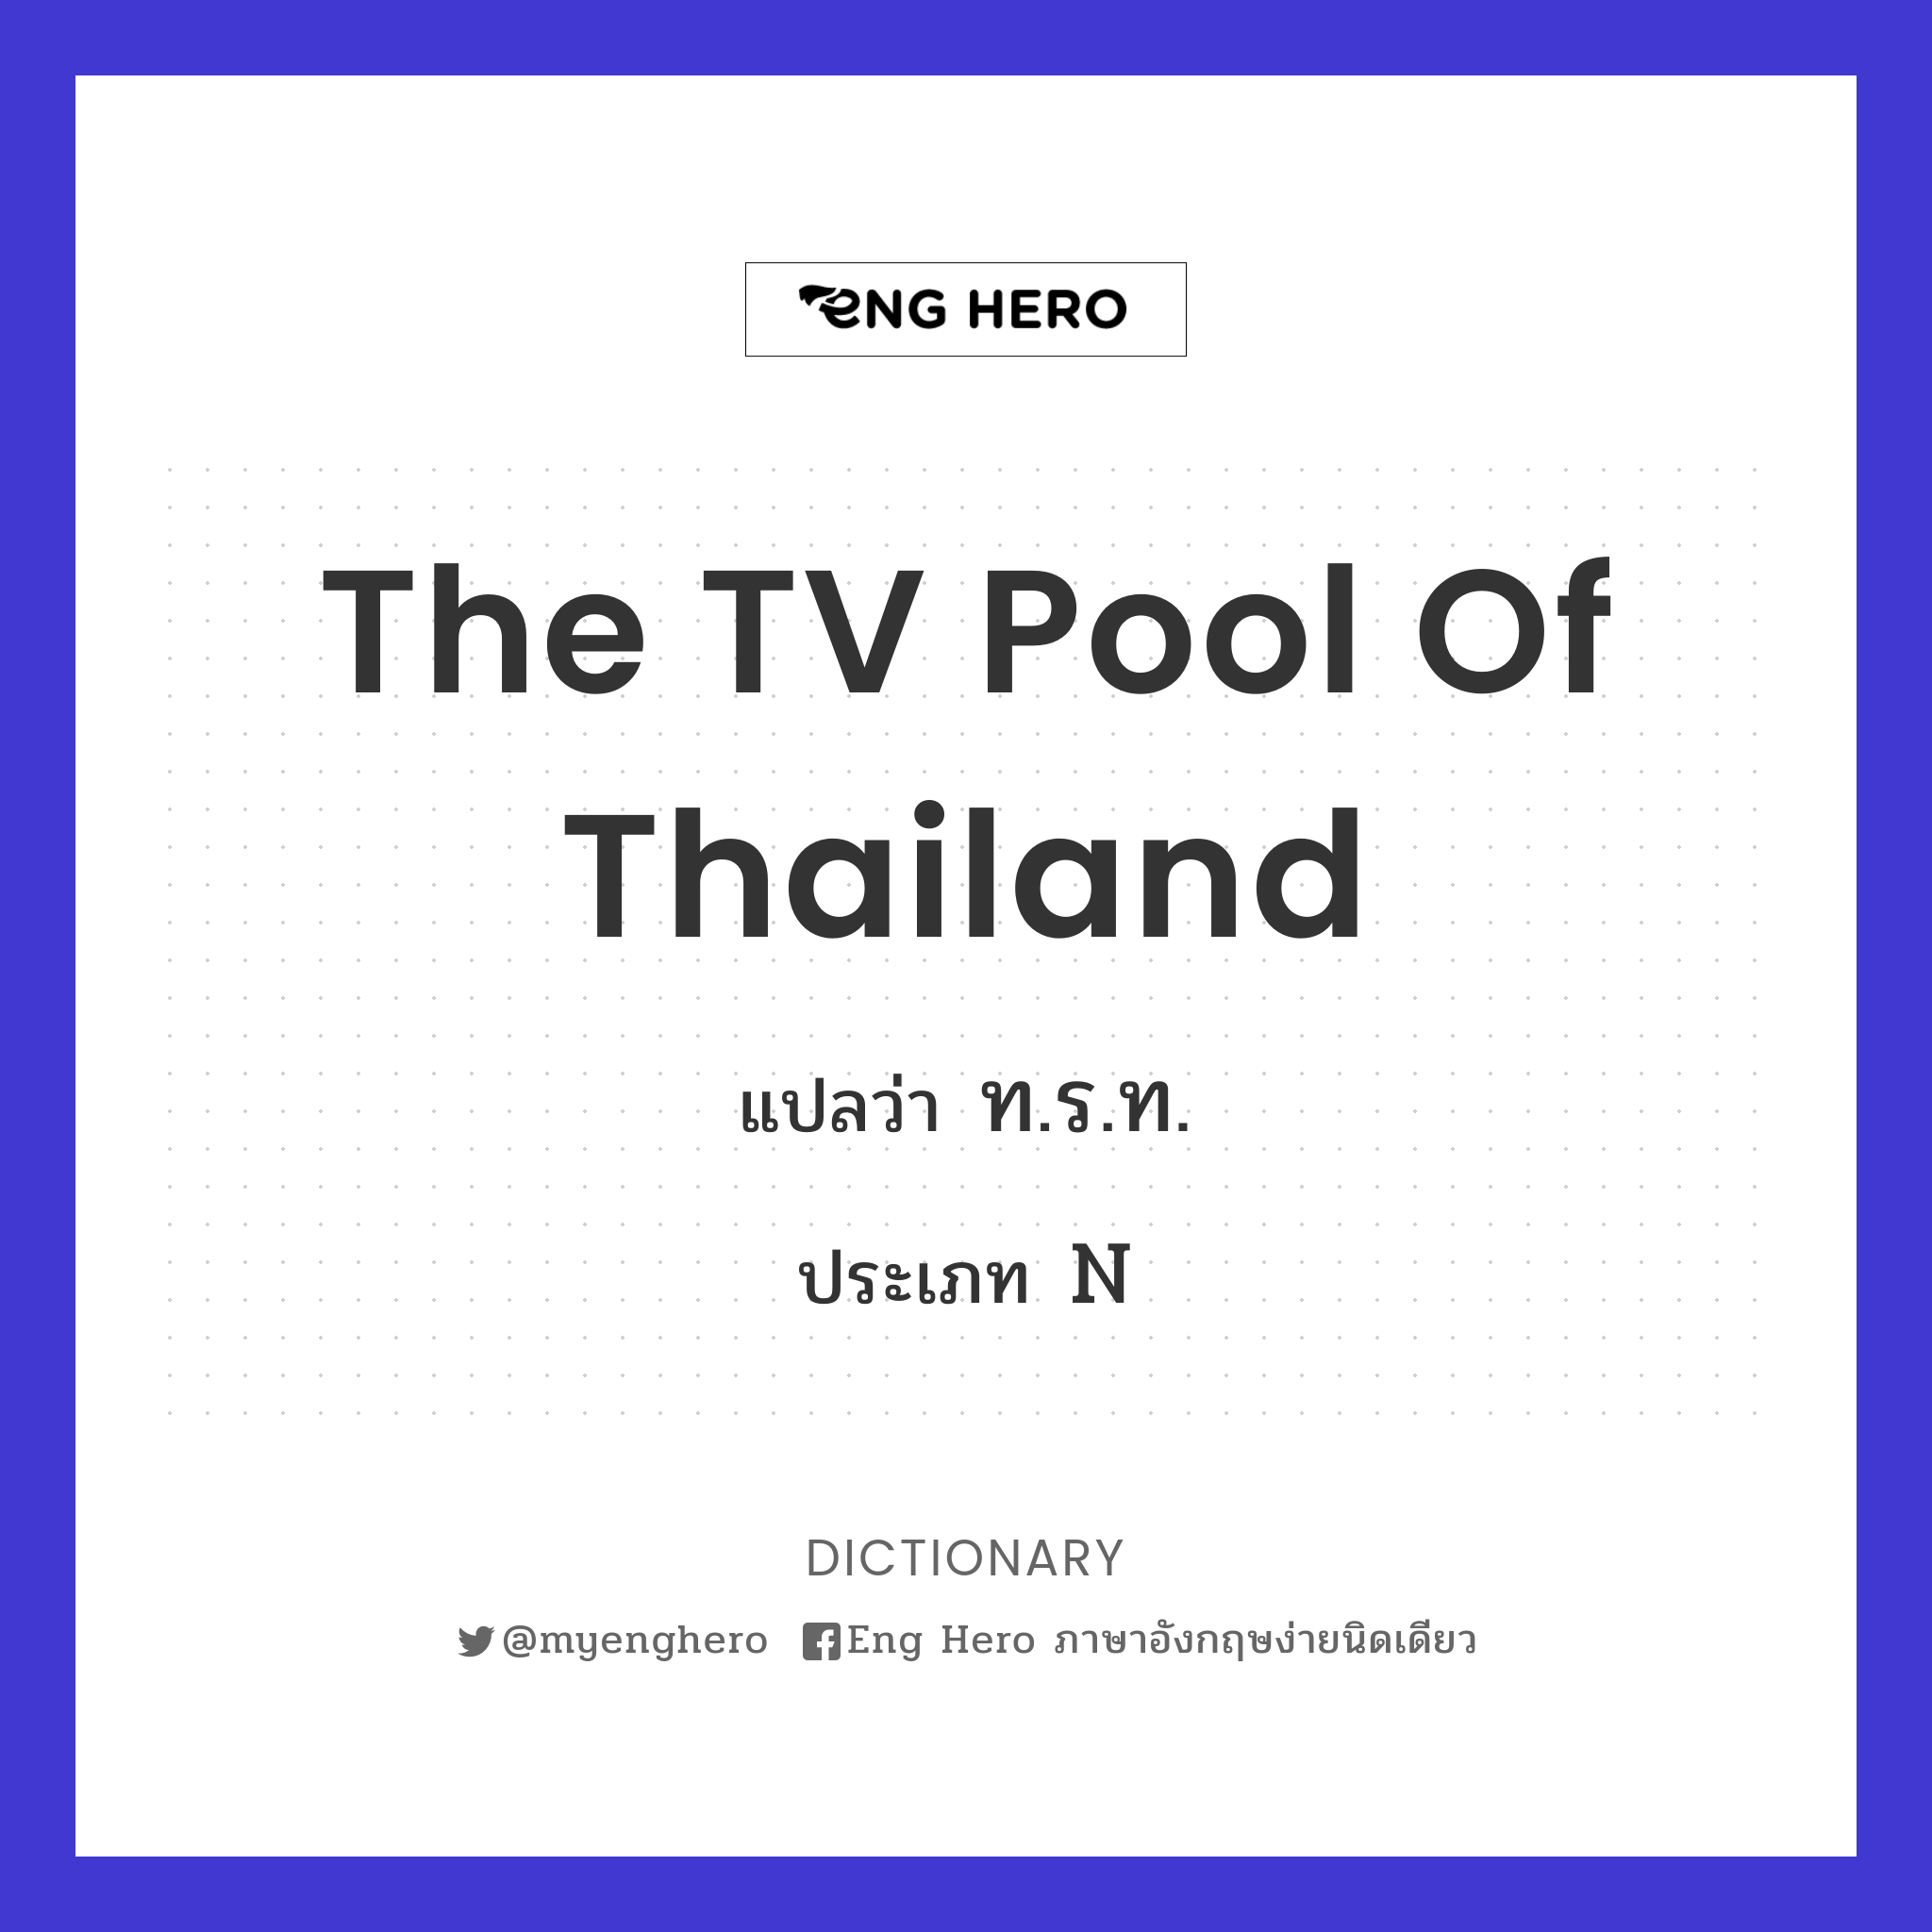 The TV Pool of Thailand